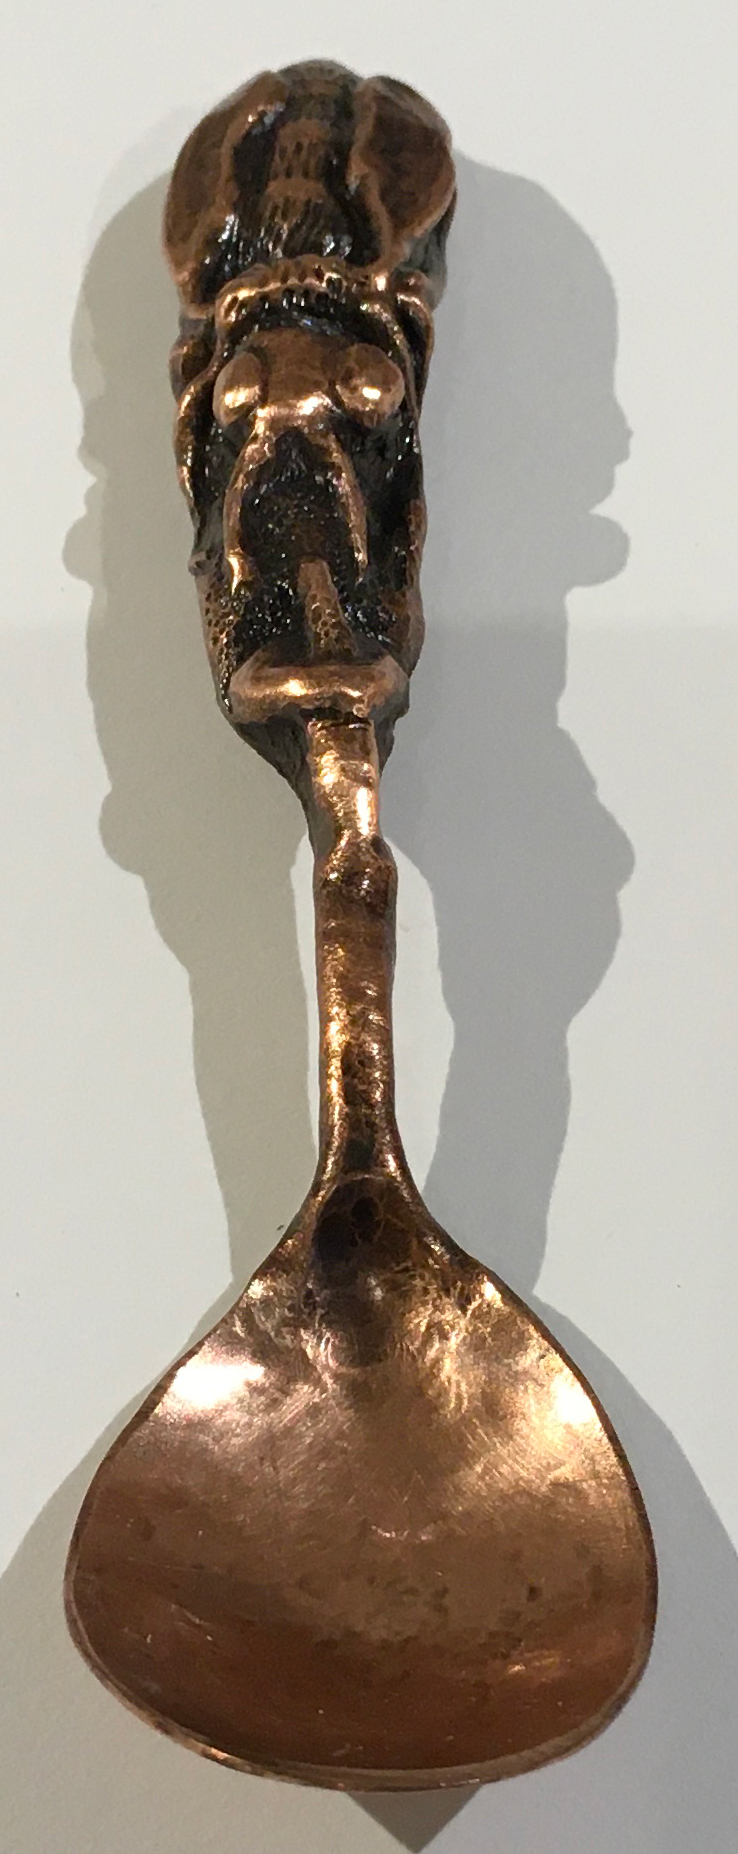 Linda Kelen, Bee Spoon, 2018, copper, 5.75 inches, collection of the artist